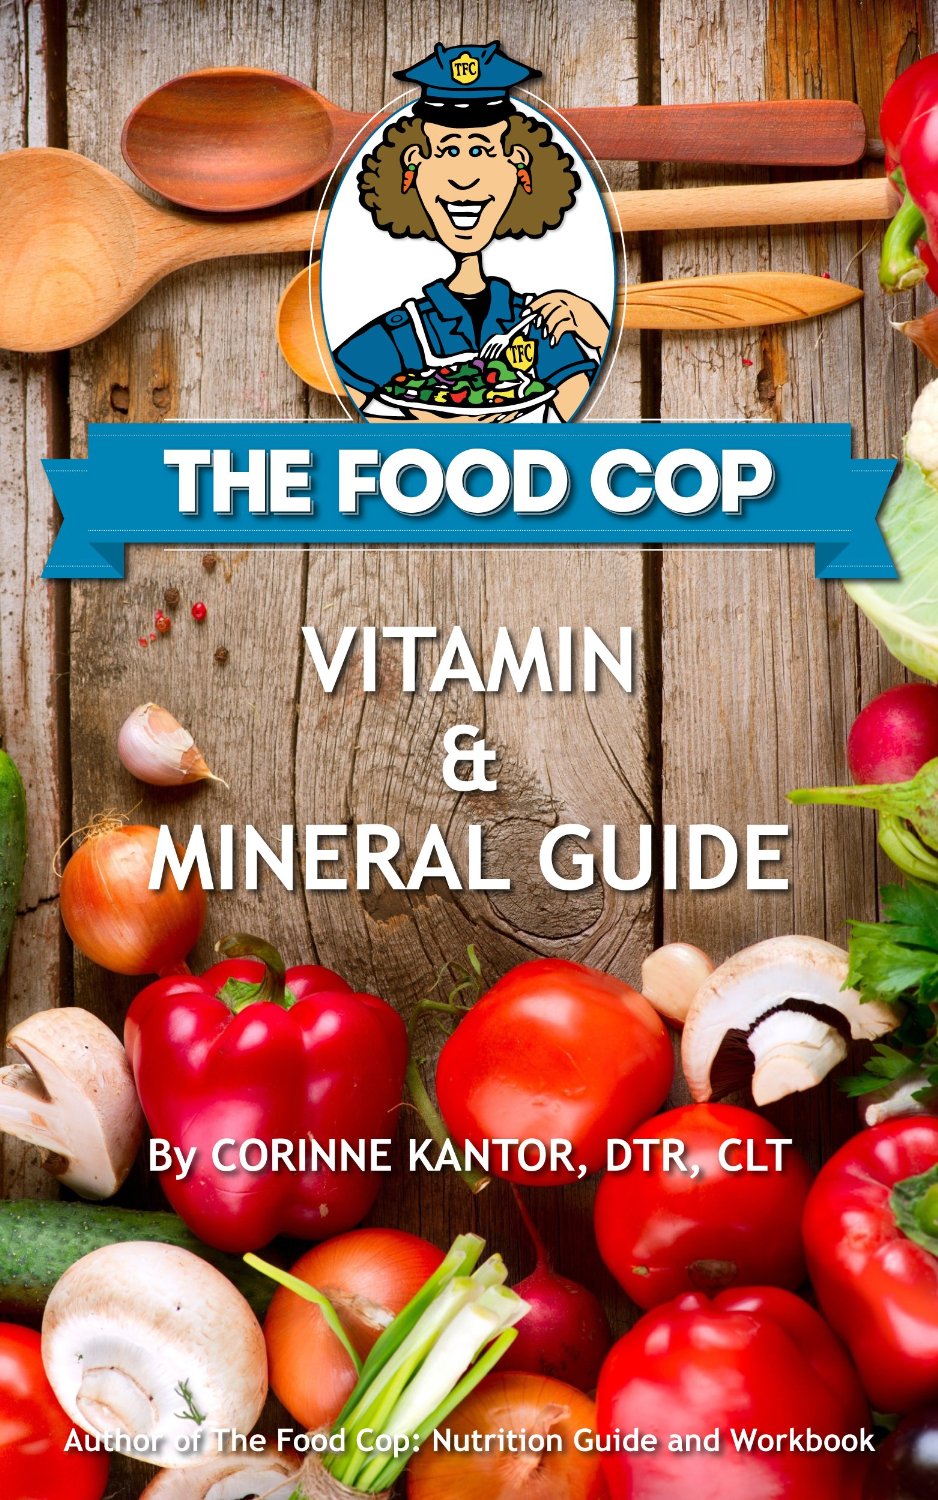 The Food Cop: Vitamin and Mineral Guide by Corinne Kantor